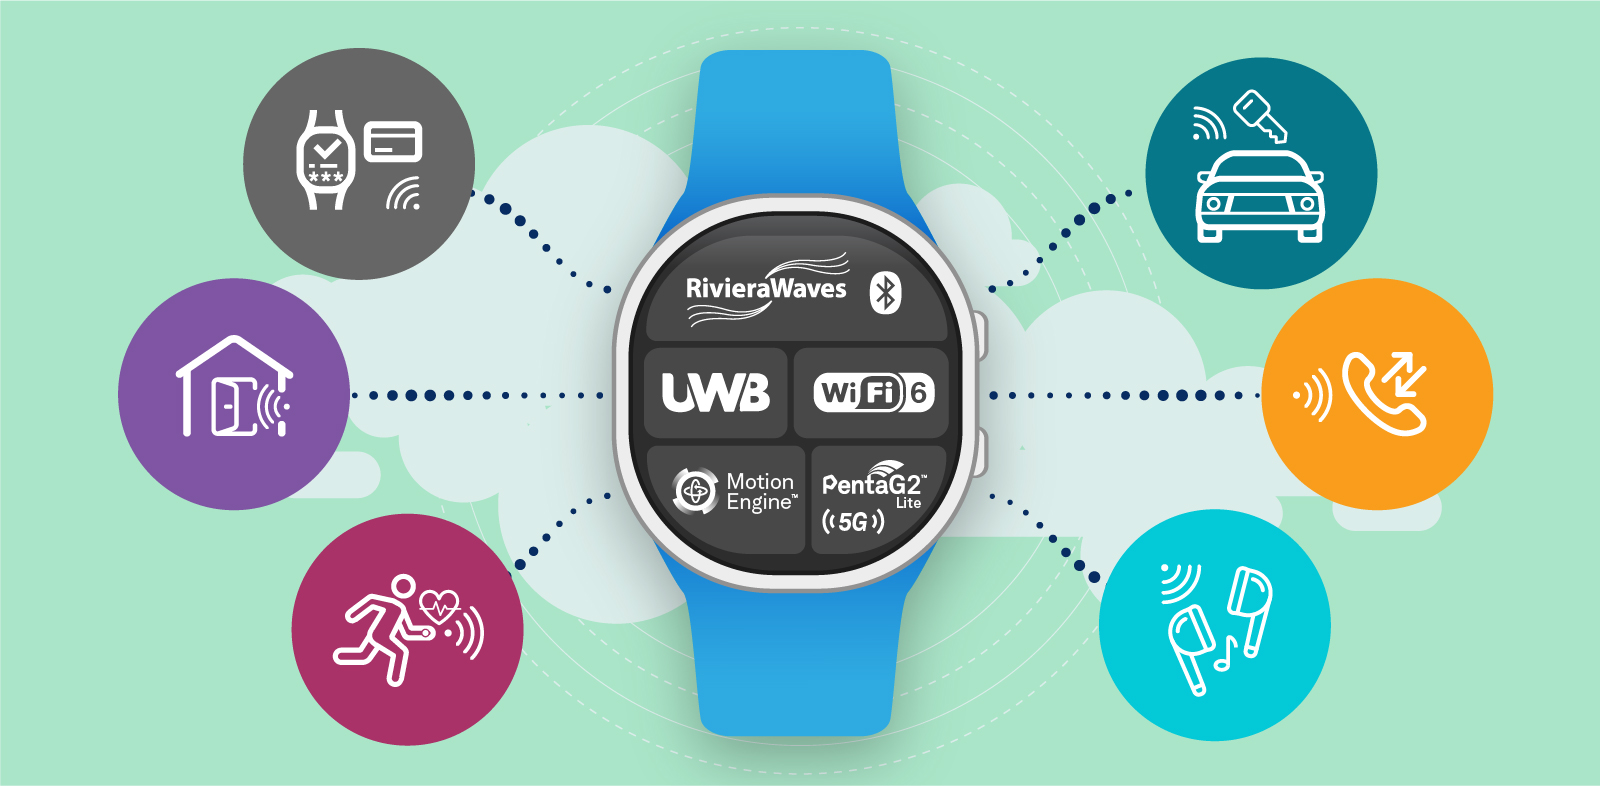 use cases of CEVA's technology in smartwatches